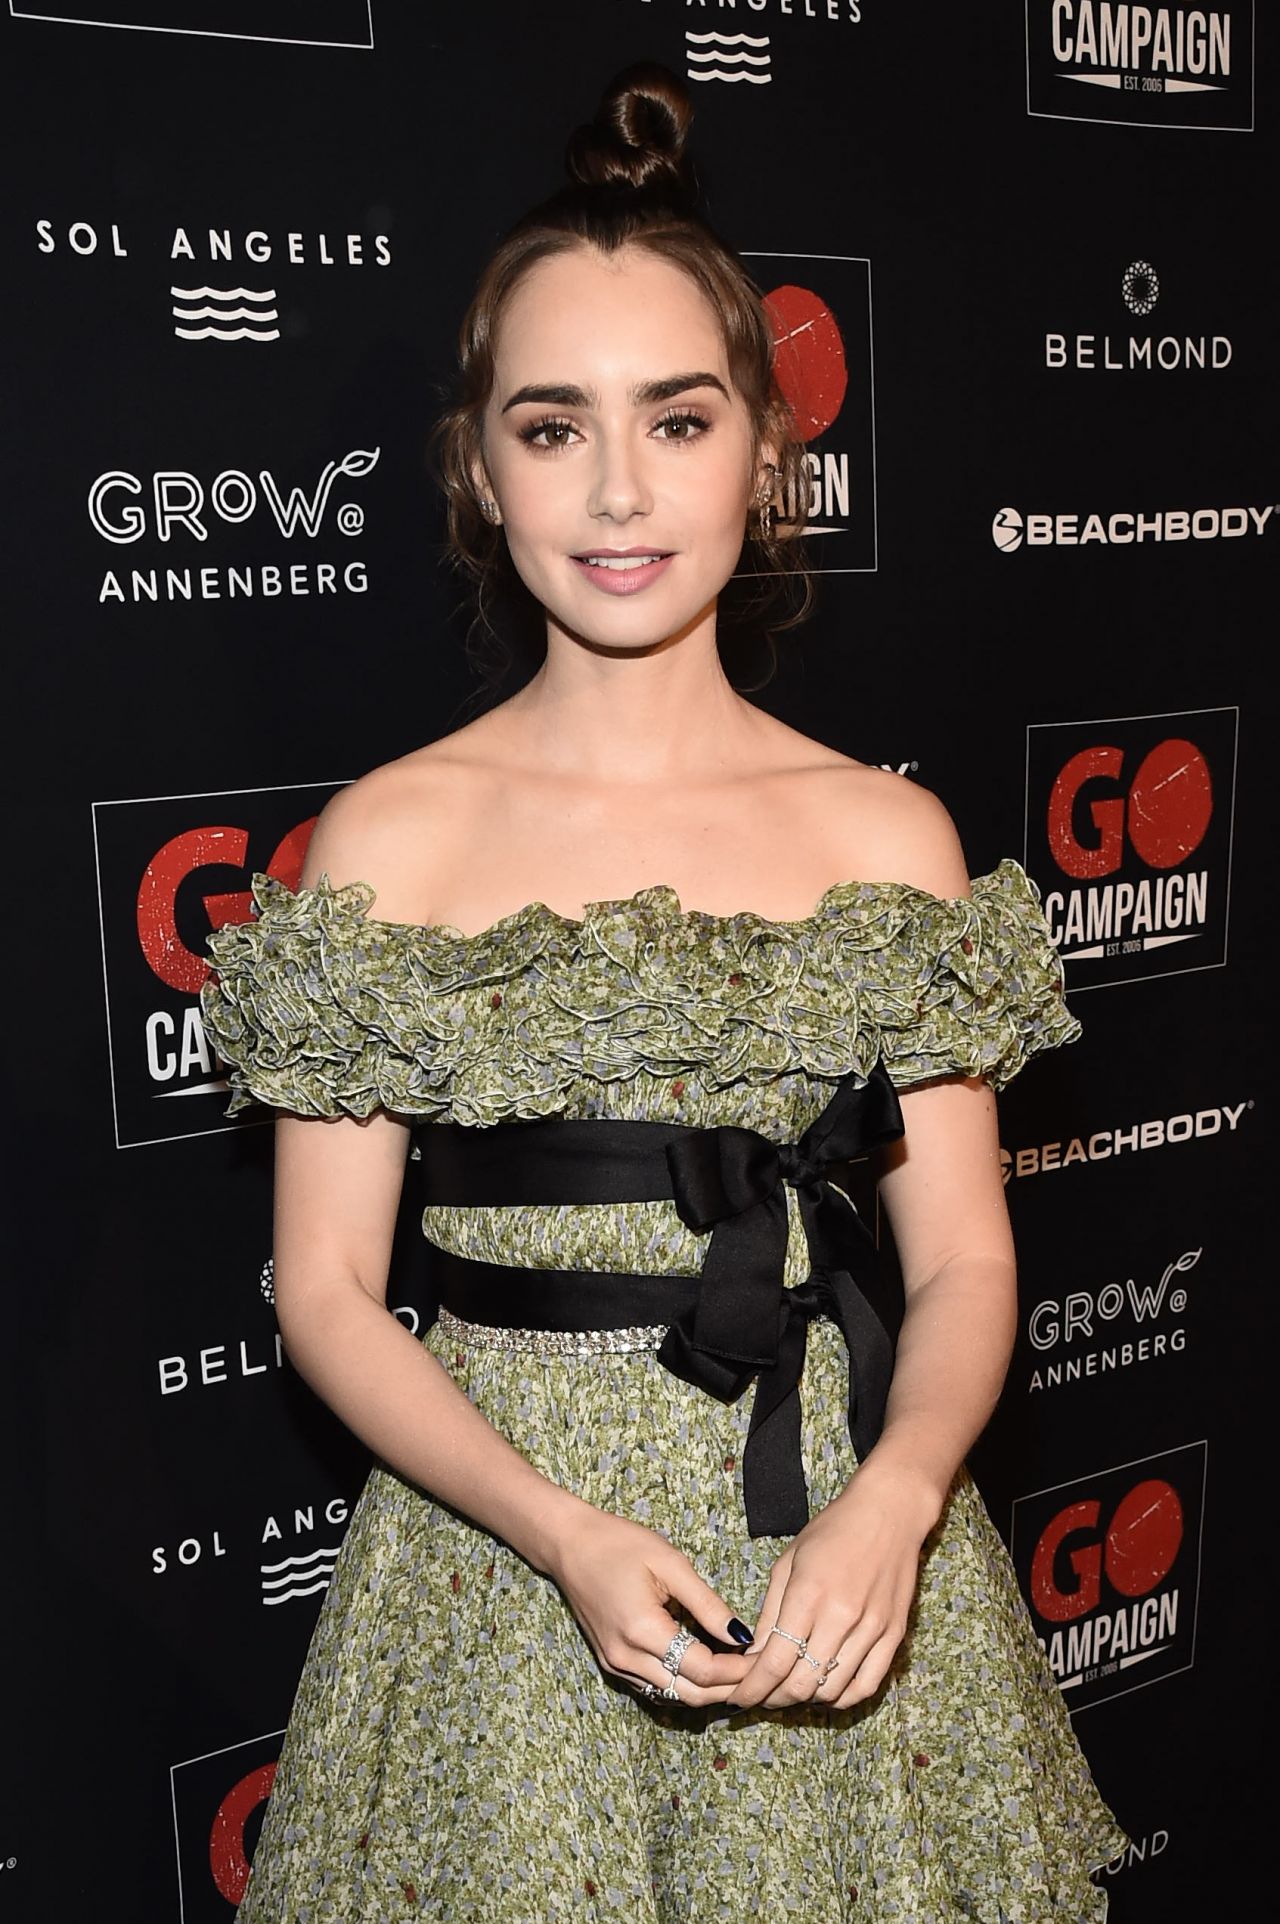 lily-collins-go-campaign-gala-in-los-angeles-10-20-2018-8.jpg